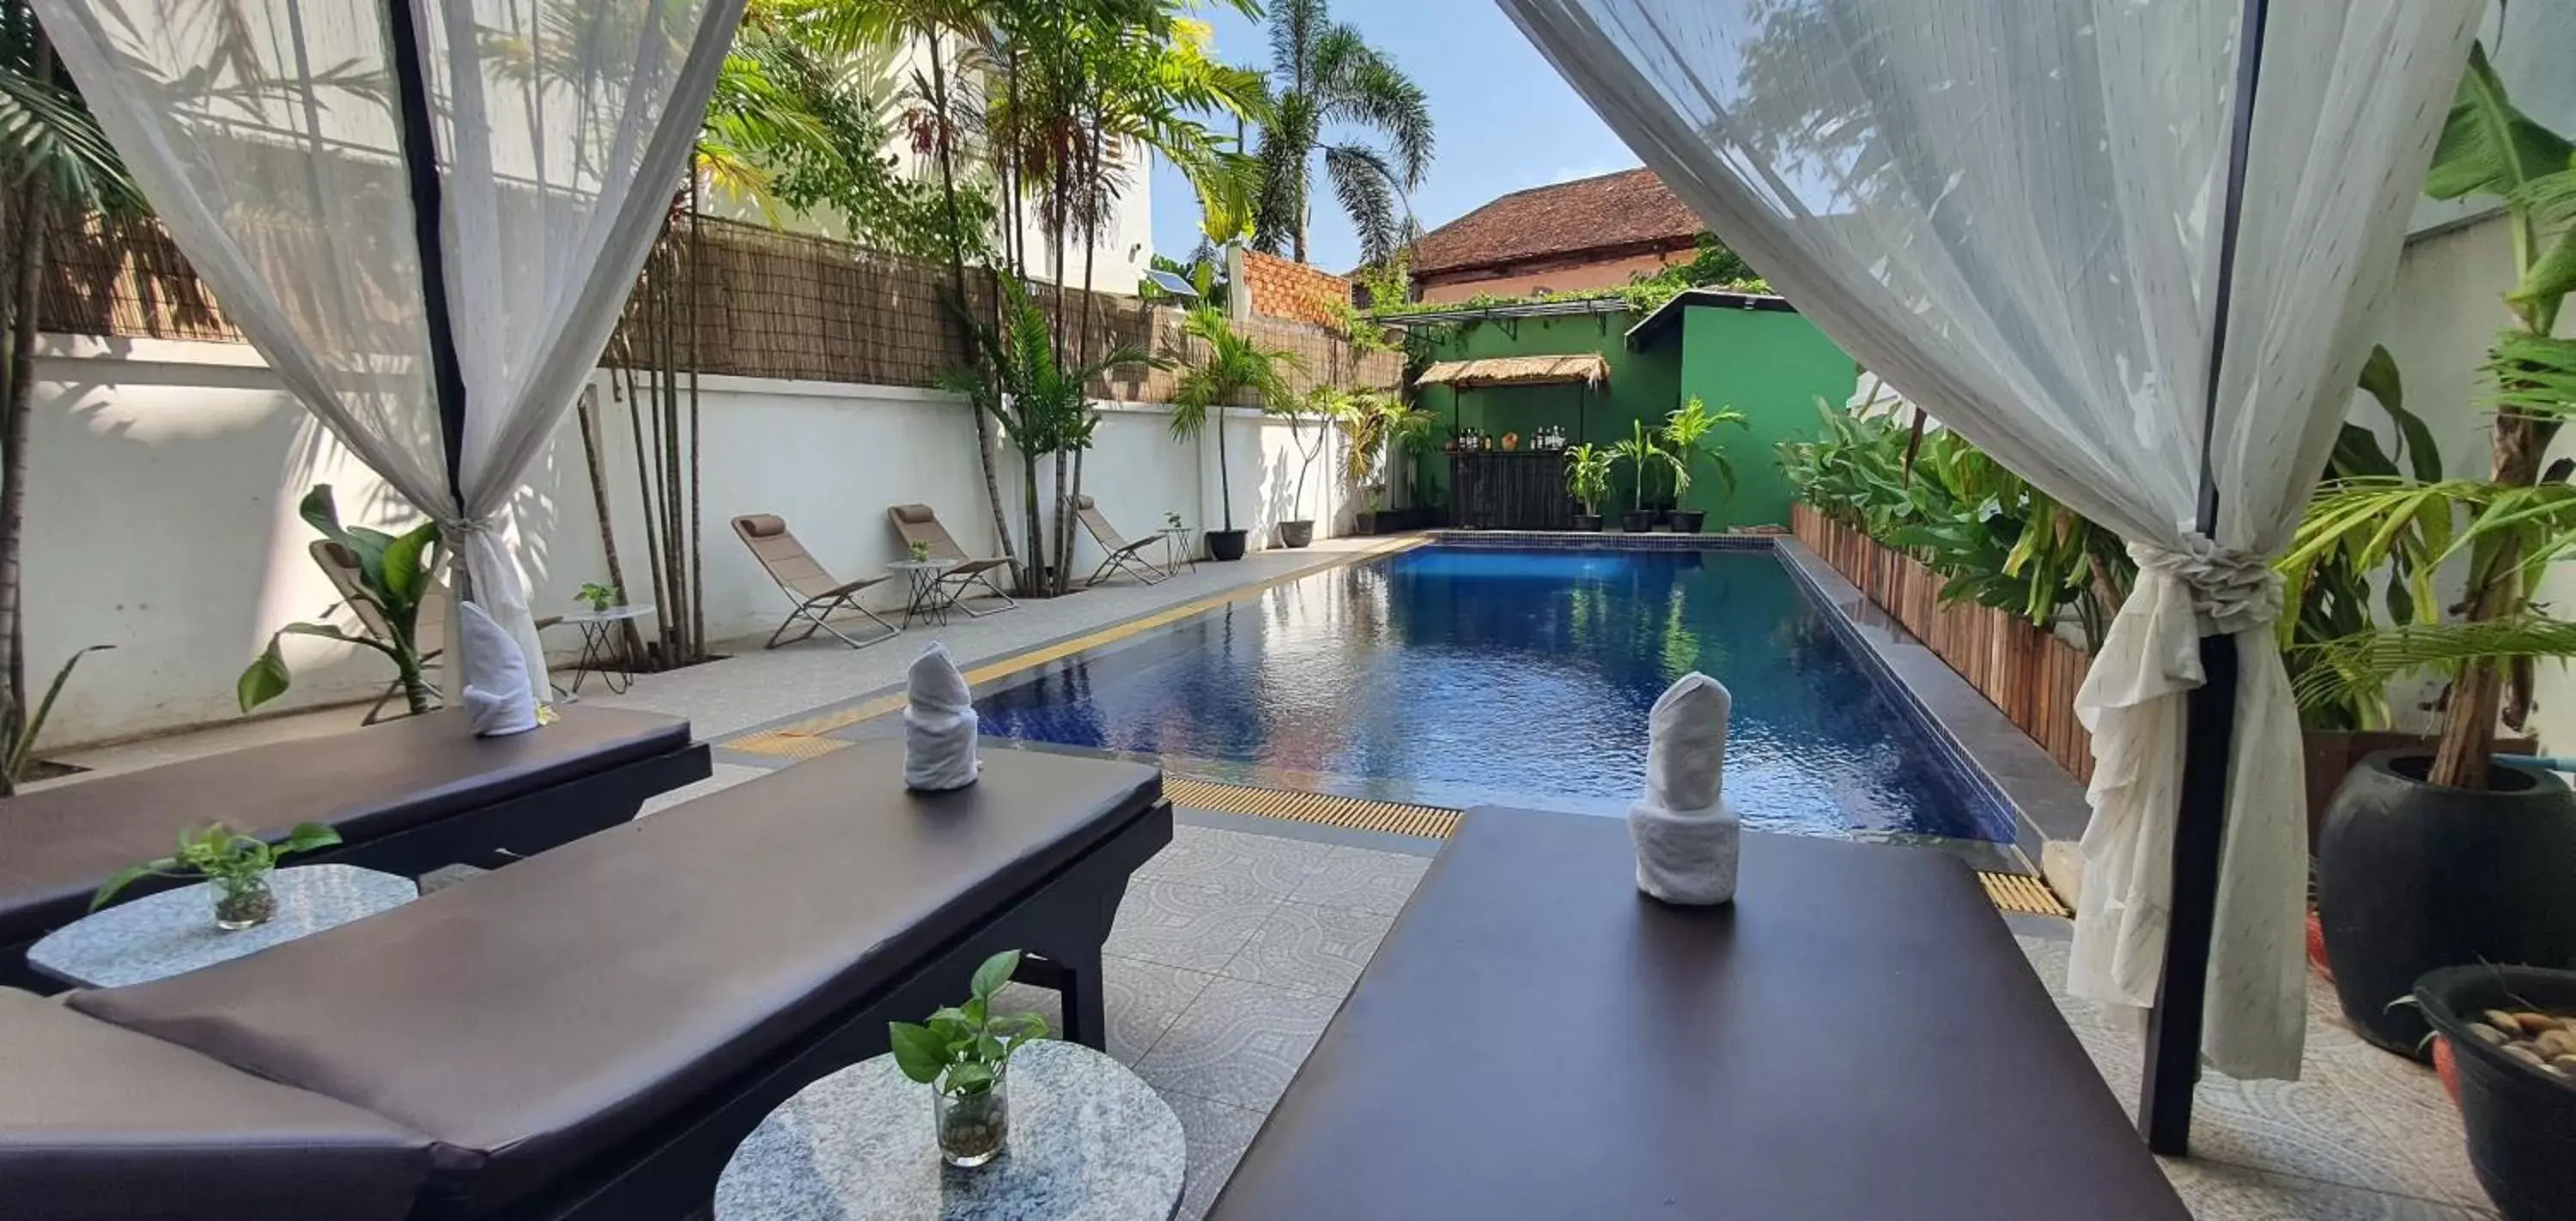 Swimming Pool in Siem Reap Urban Boutique Hotel